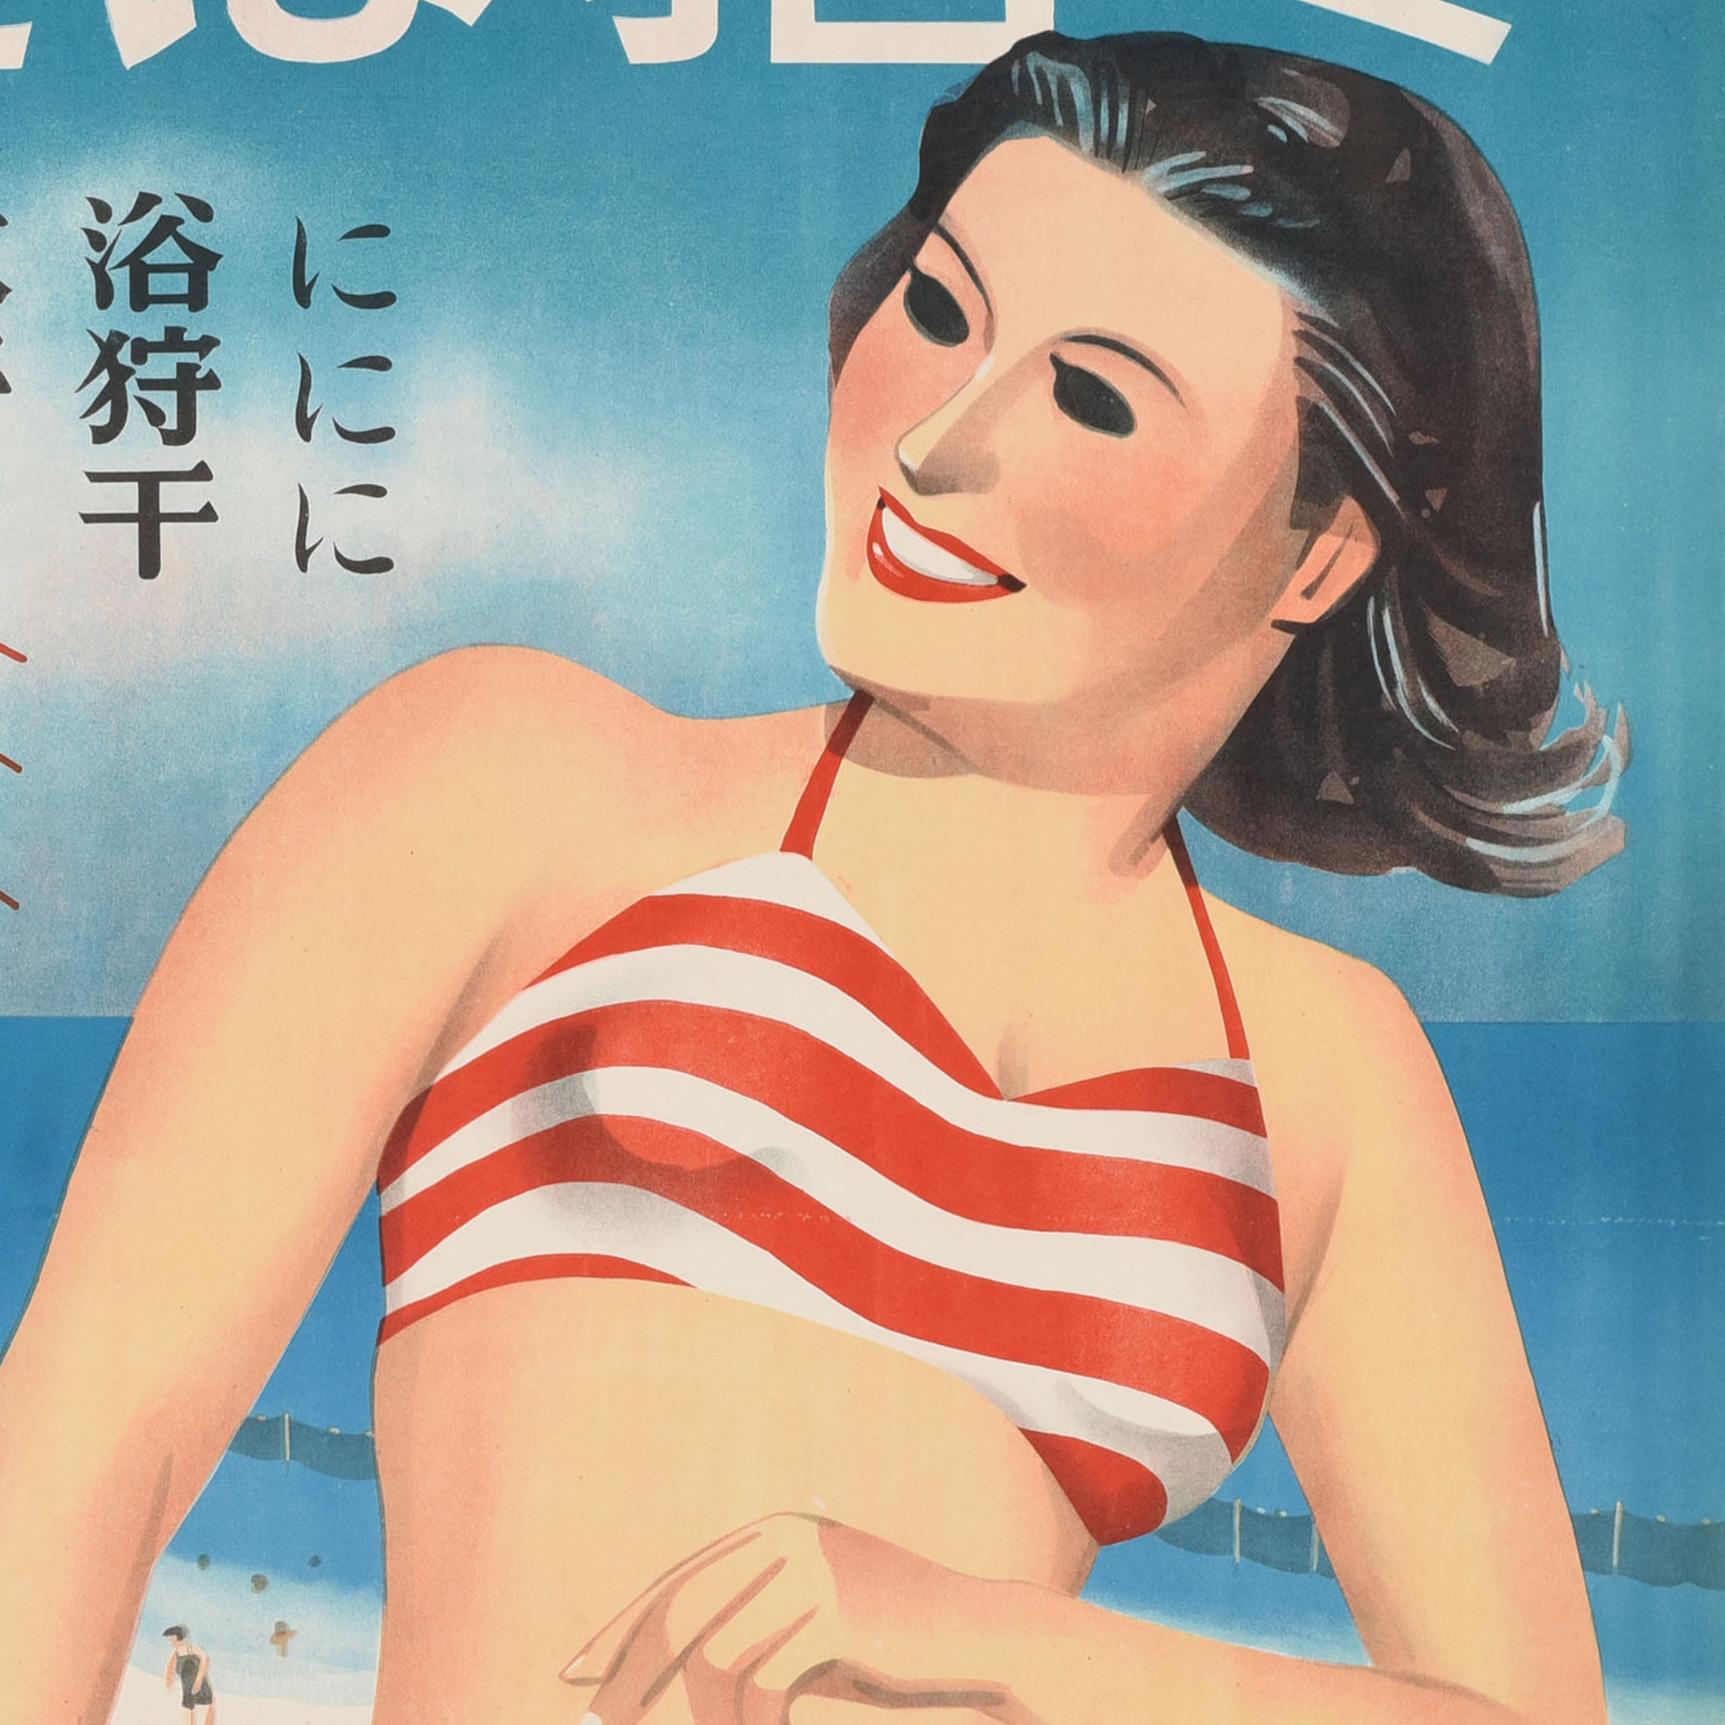 Original vintage Japanese travel poster - Summer Invites You - issued by the Ujiyamada City Tourism Association and the Japan Transport Corporation featuring a smiling lady wearing a red and white striped bikini and sitting next to shells on a sandy